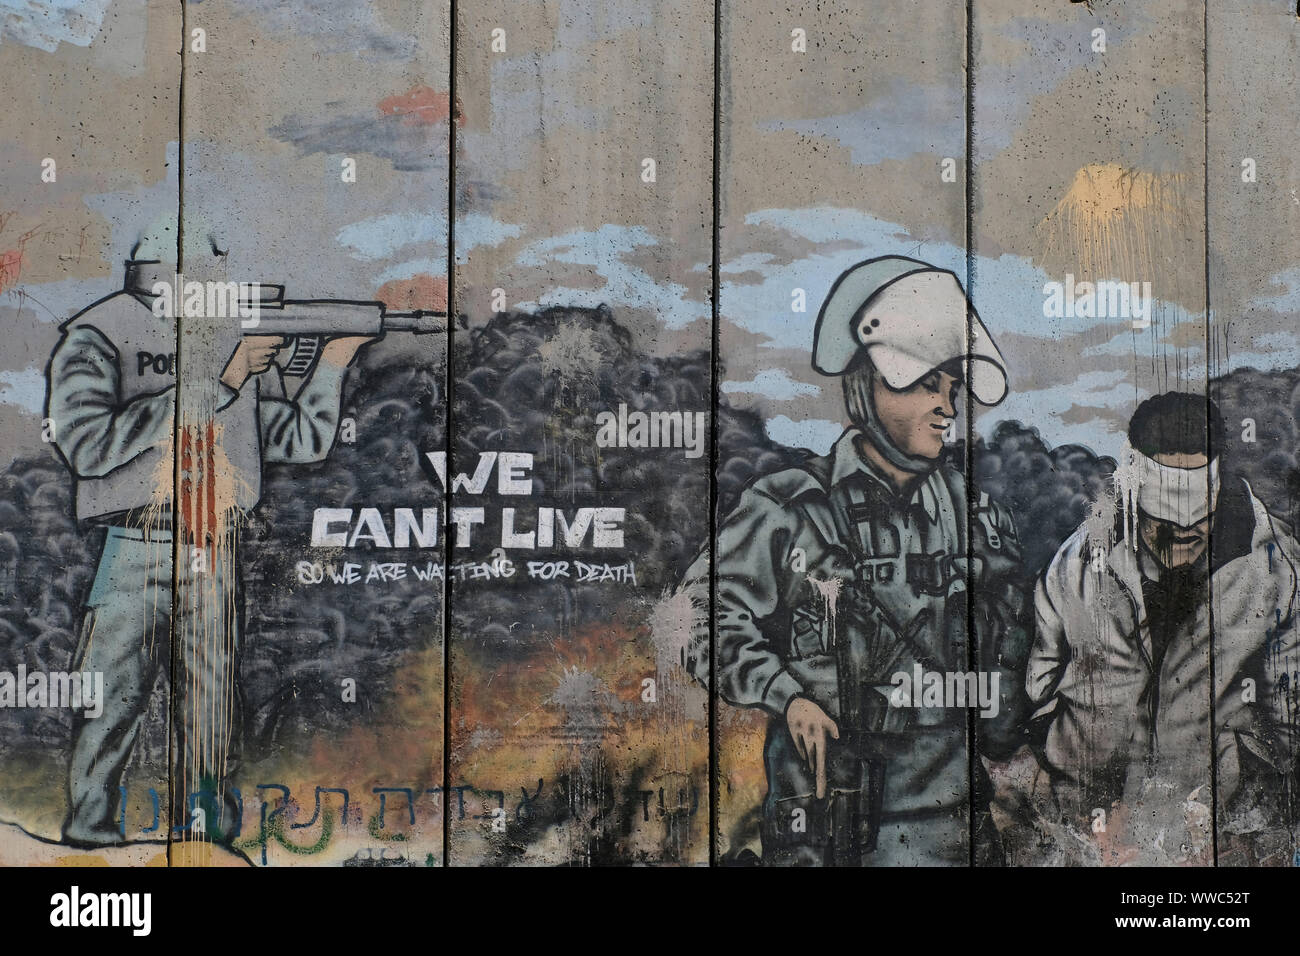 A large graffito shows Israeli soldiers arresting a blindfolded Palestinian man carries the message: 'We can't live, so we are waiting for death.' painted on the separation barrier or wall in Aida also spelled 'Ayda, a Palestinian refugee camp situated 2 kilometers north of Bethlehem in the central West Bank established in 1950 by refugees from the Jerusalem and Hebron areas. Palestinian Territories, Israel Stock Photo